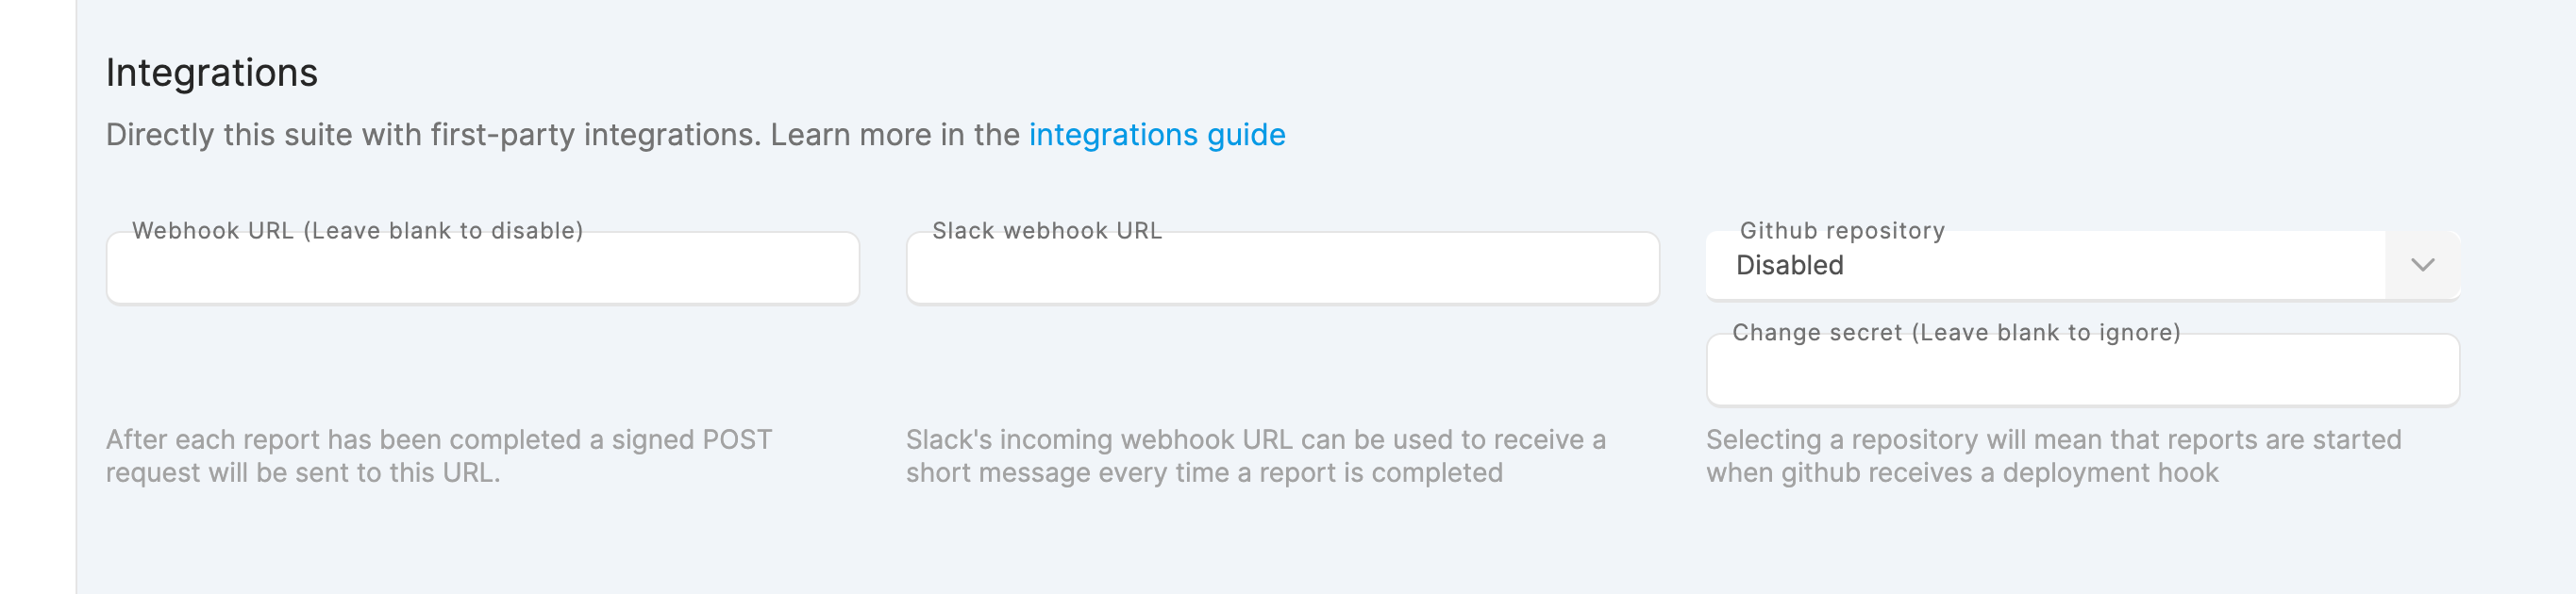 A webhook will be automatically fired to the URL after each test report has been completed